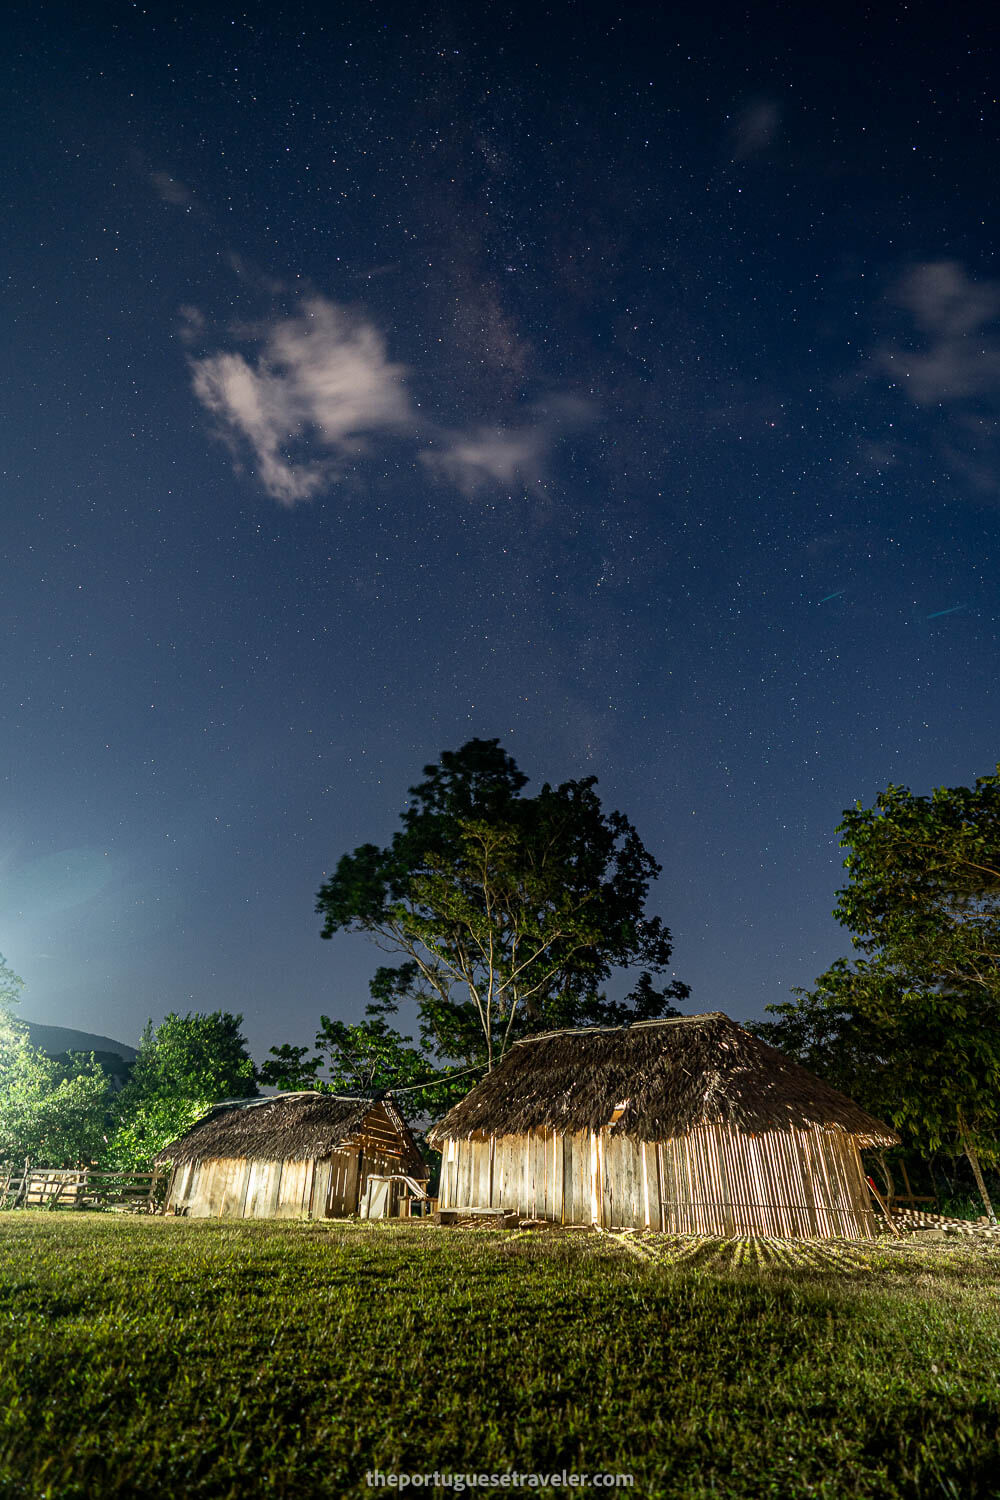 The chozas at night while the group was doing the Ayahuasca ritual